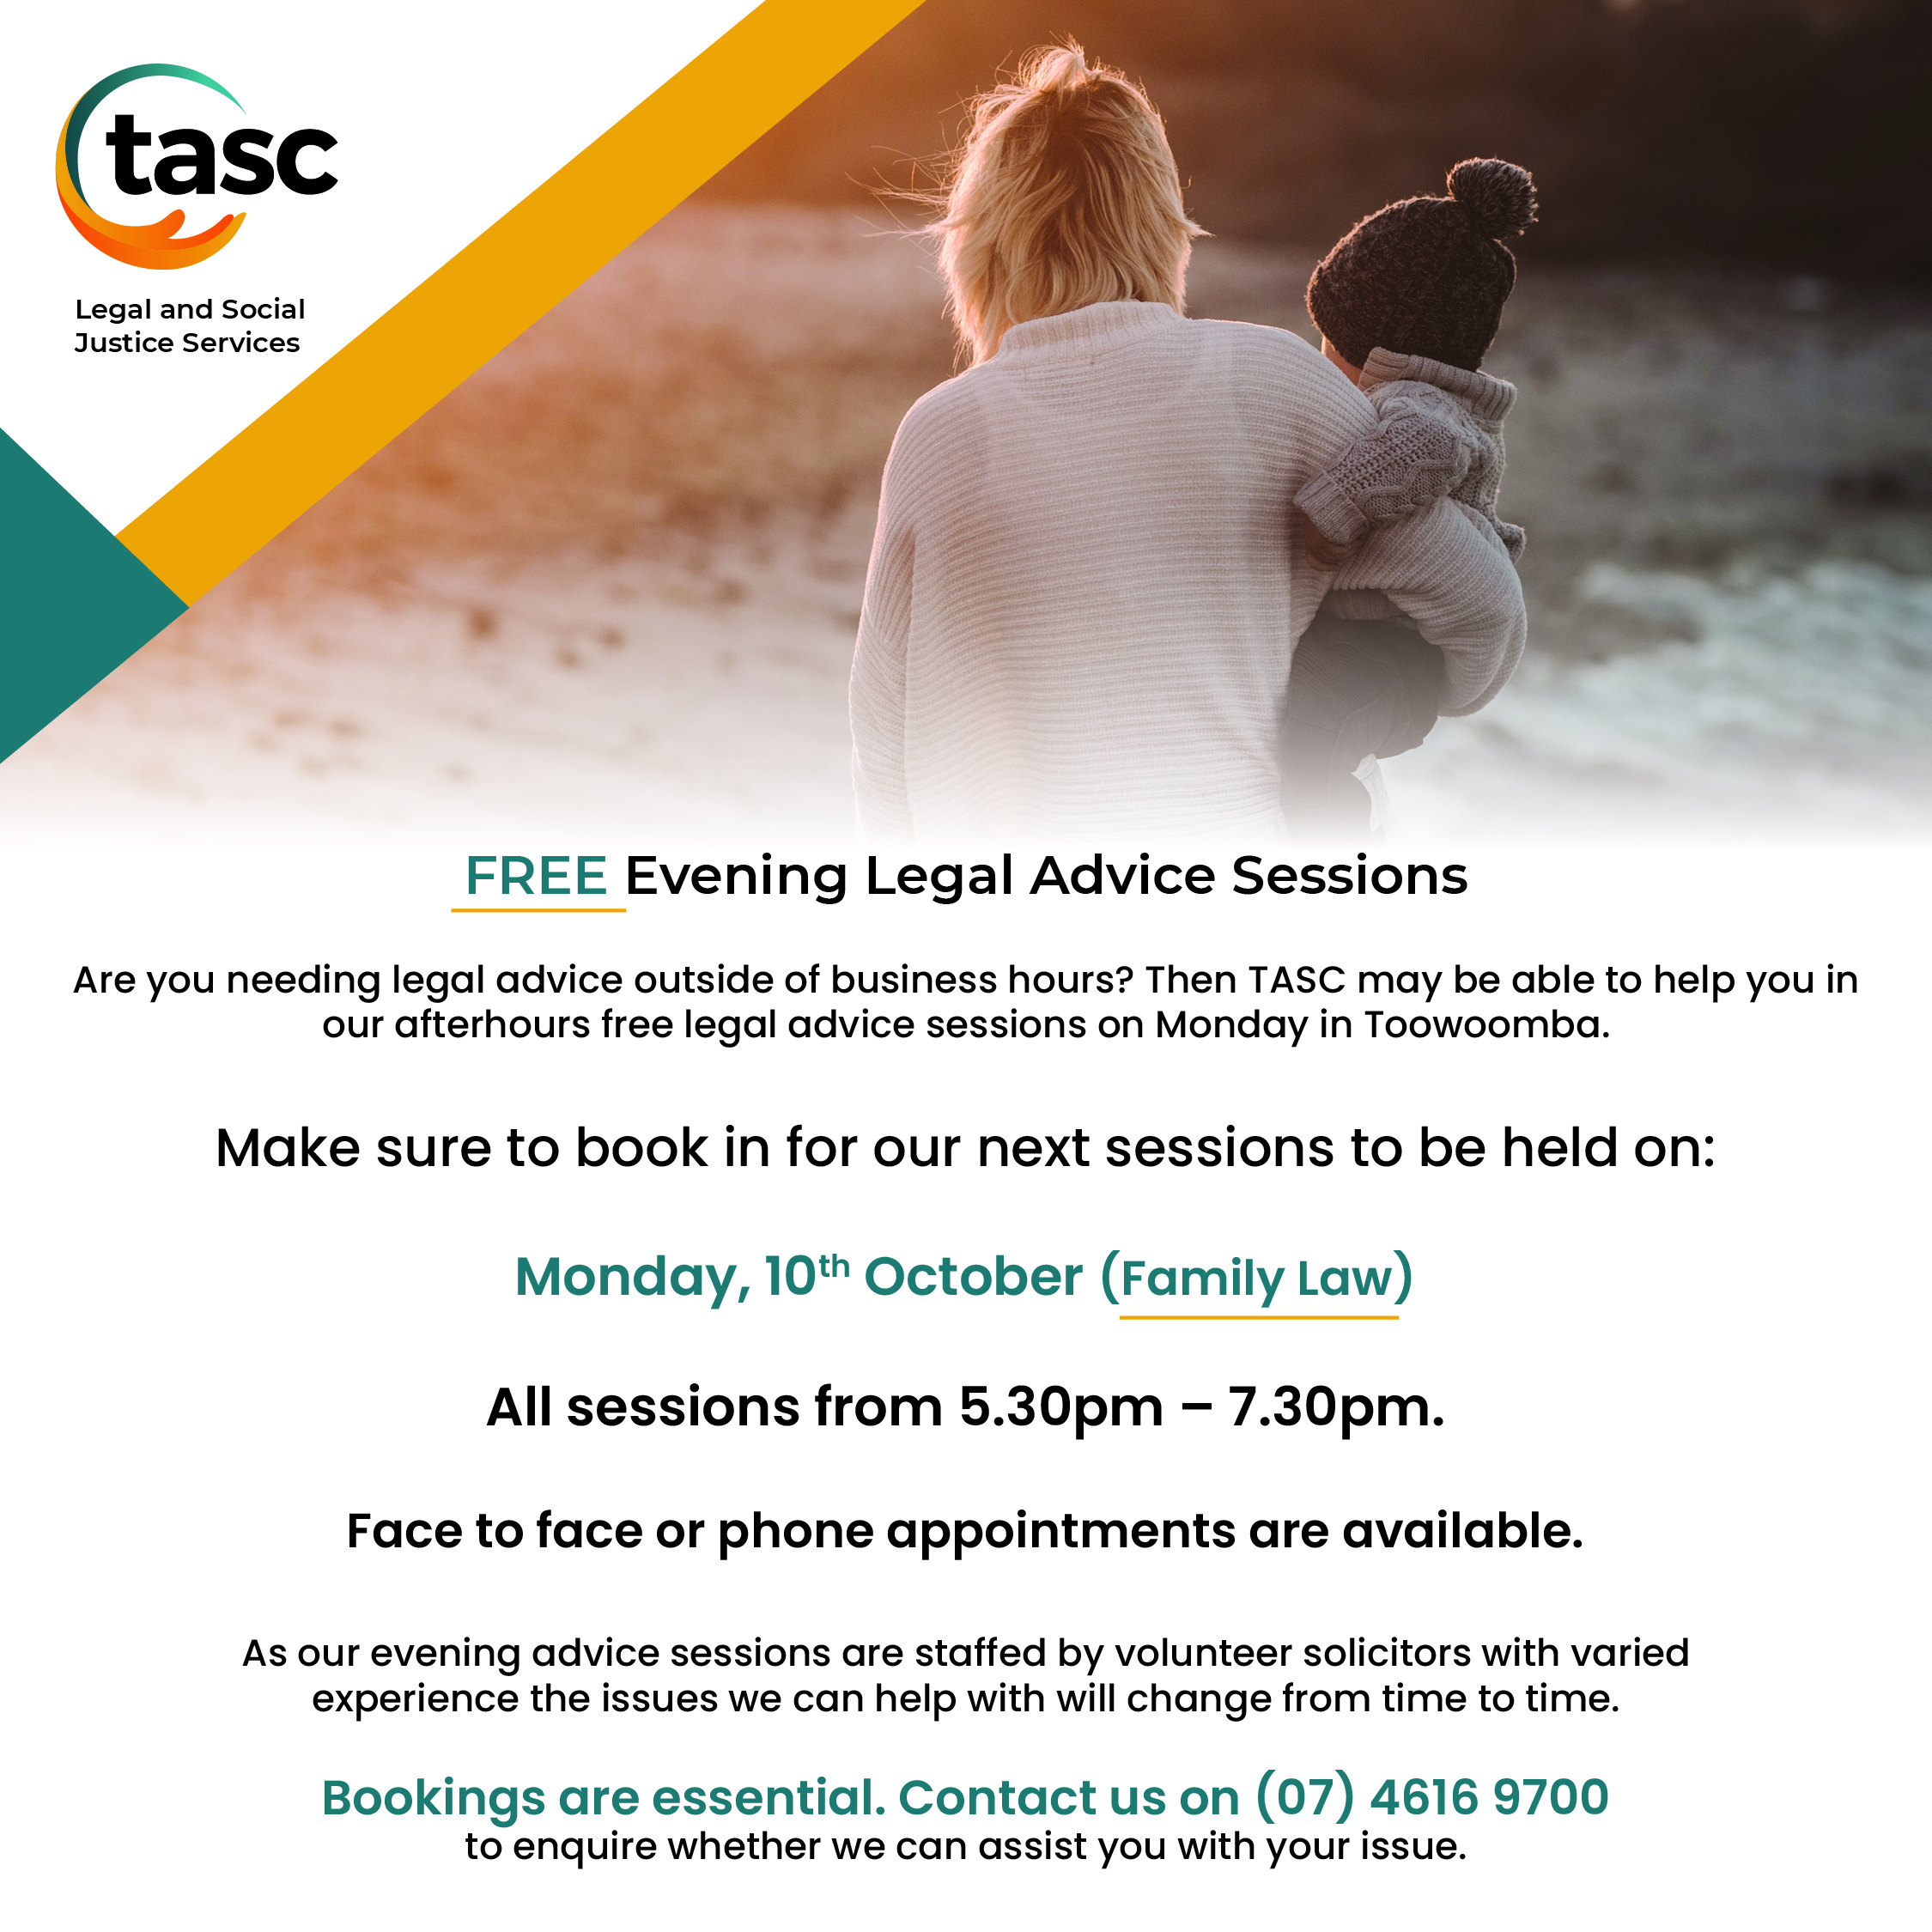 Free Evening Legal Advice Sessions (Family Law) Monday, 10 October 2022